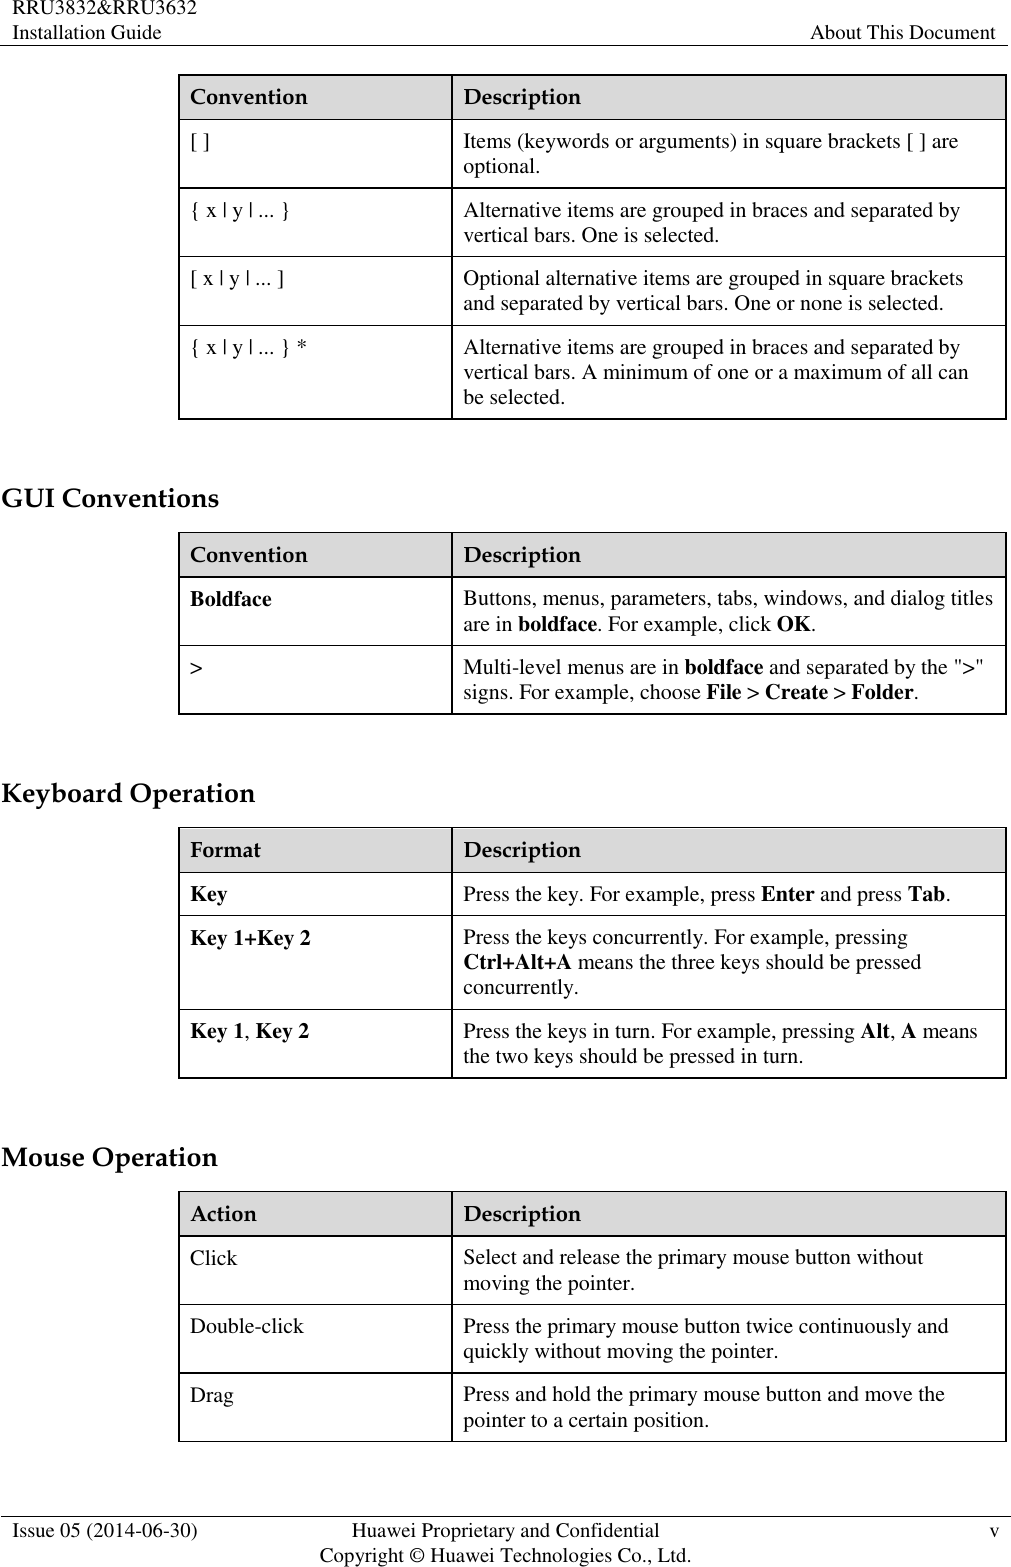 RRU3832&amp;RRU3632 Installation Guide About This Document  Issue 05 (2014-06-30) Huawei Proprietary and Confidential                                     Copyright © Huawei Technologies Co., Ltd. v  Convention Description [ ] Items (keywords or arguments) in square brackets [ ] are optional. { x | y | ... } Alternative items are grouped in braces and separated by vertical bars. One is selected. [ x | y | ... ] Optional alternative items are grouped in square brackets and separated by vertical bars. One or none is selected. { x | y | ... } * Alternative items are grouped in braces and separated by vertical bars. A minimum of one or a maximum of all can be selected.  GUI Conventions Convention Description Boldface Buttons, menus, parameters, tabs, windows, and dialog titles are in boldface. For example, click OK. &gt; Multi-level menus are in boldface and separated by the &quot;&gt;&quot; signs. For example, choose File &gt; Create &gt; Folder.  Keyboard Operation Format Description Key Press the key. For example, press Enter and press Tab. Key 1+Key 2 Press the keys concurrently. For example, pressing Ctrl+Alt+A means the three keys should be pressed concurrently. Key 1, Key 2 Press the keys in turn. For example, pressing Alt, A means the two keys should be pressed in turn.  Mouse Operation Action Description Click Select and release the primary mouse button without moving the pointer. Double-click Press the primary mouse button twice continuously and quickly without moving the pointer. Drag Press and hold the primary mouse button and move the pointer to a certain position. 